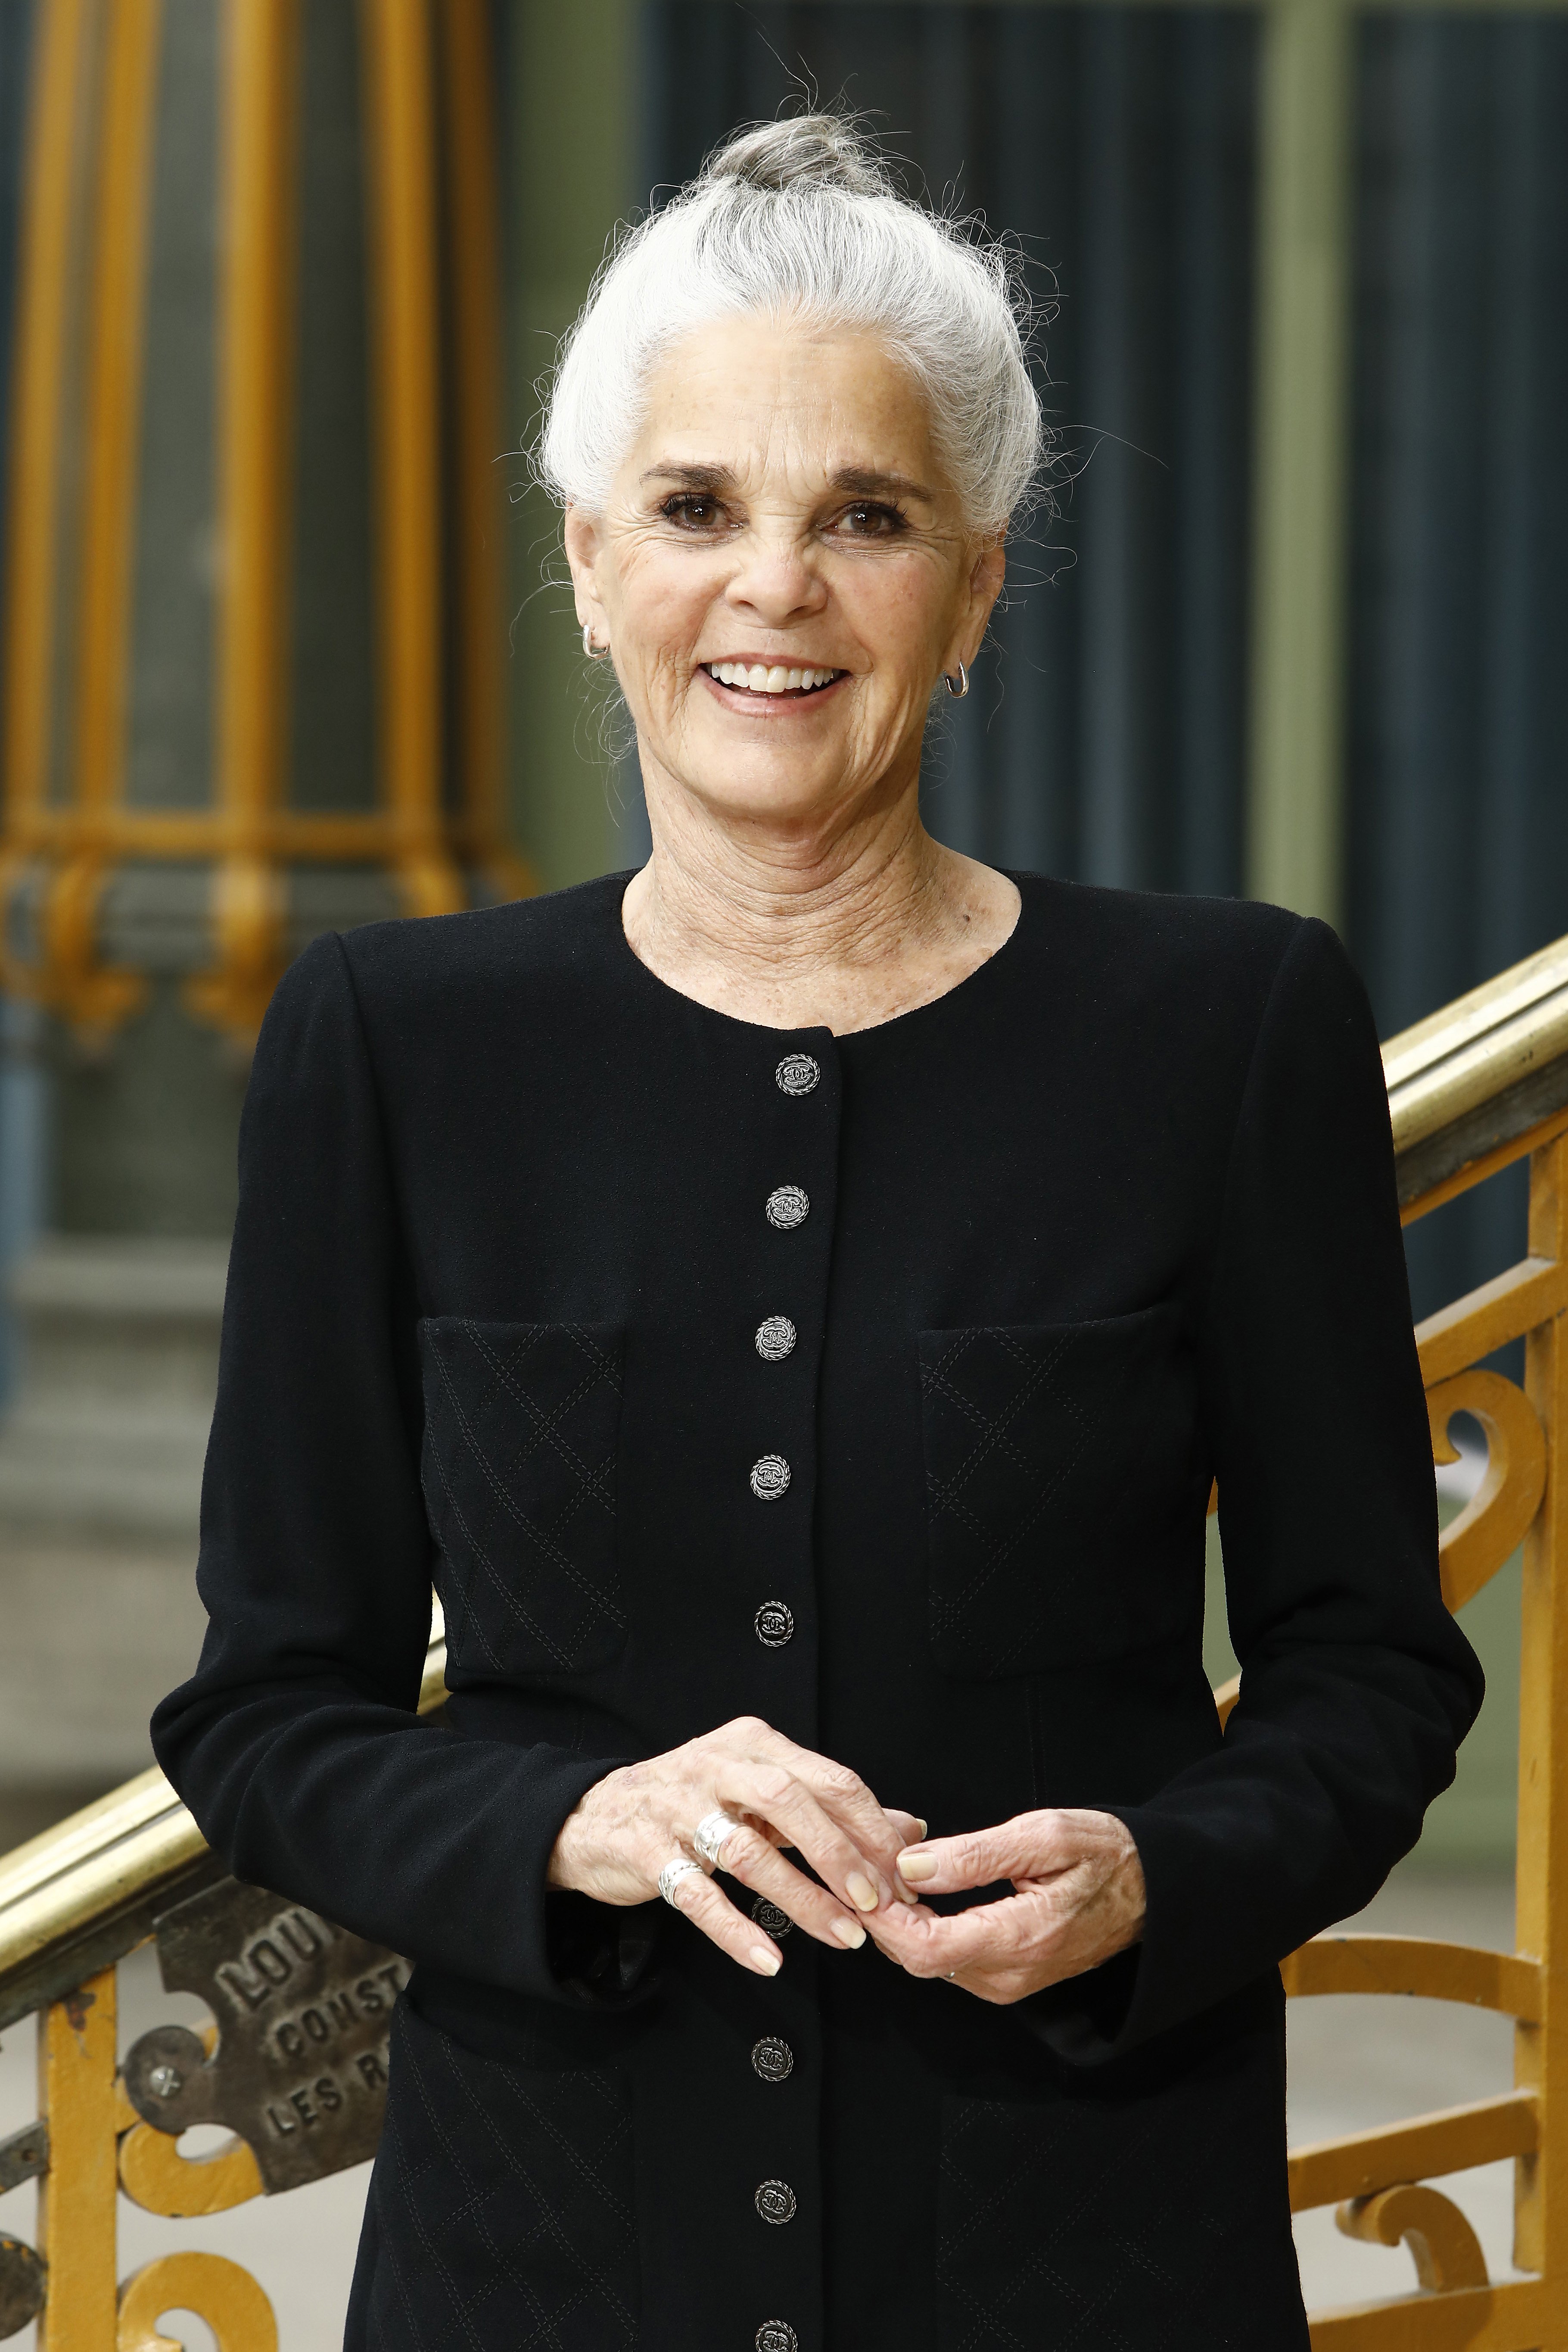 Ali MacGraw on May 03, 2019 in Paris, France. | Source: Getty Images